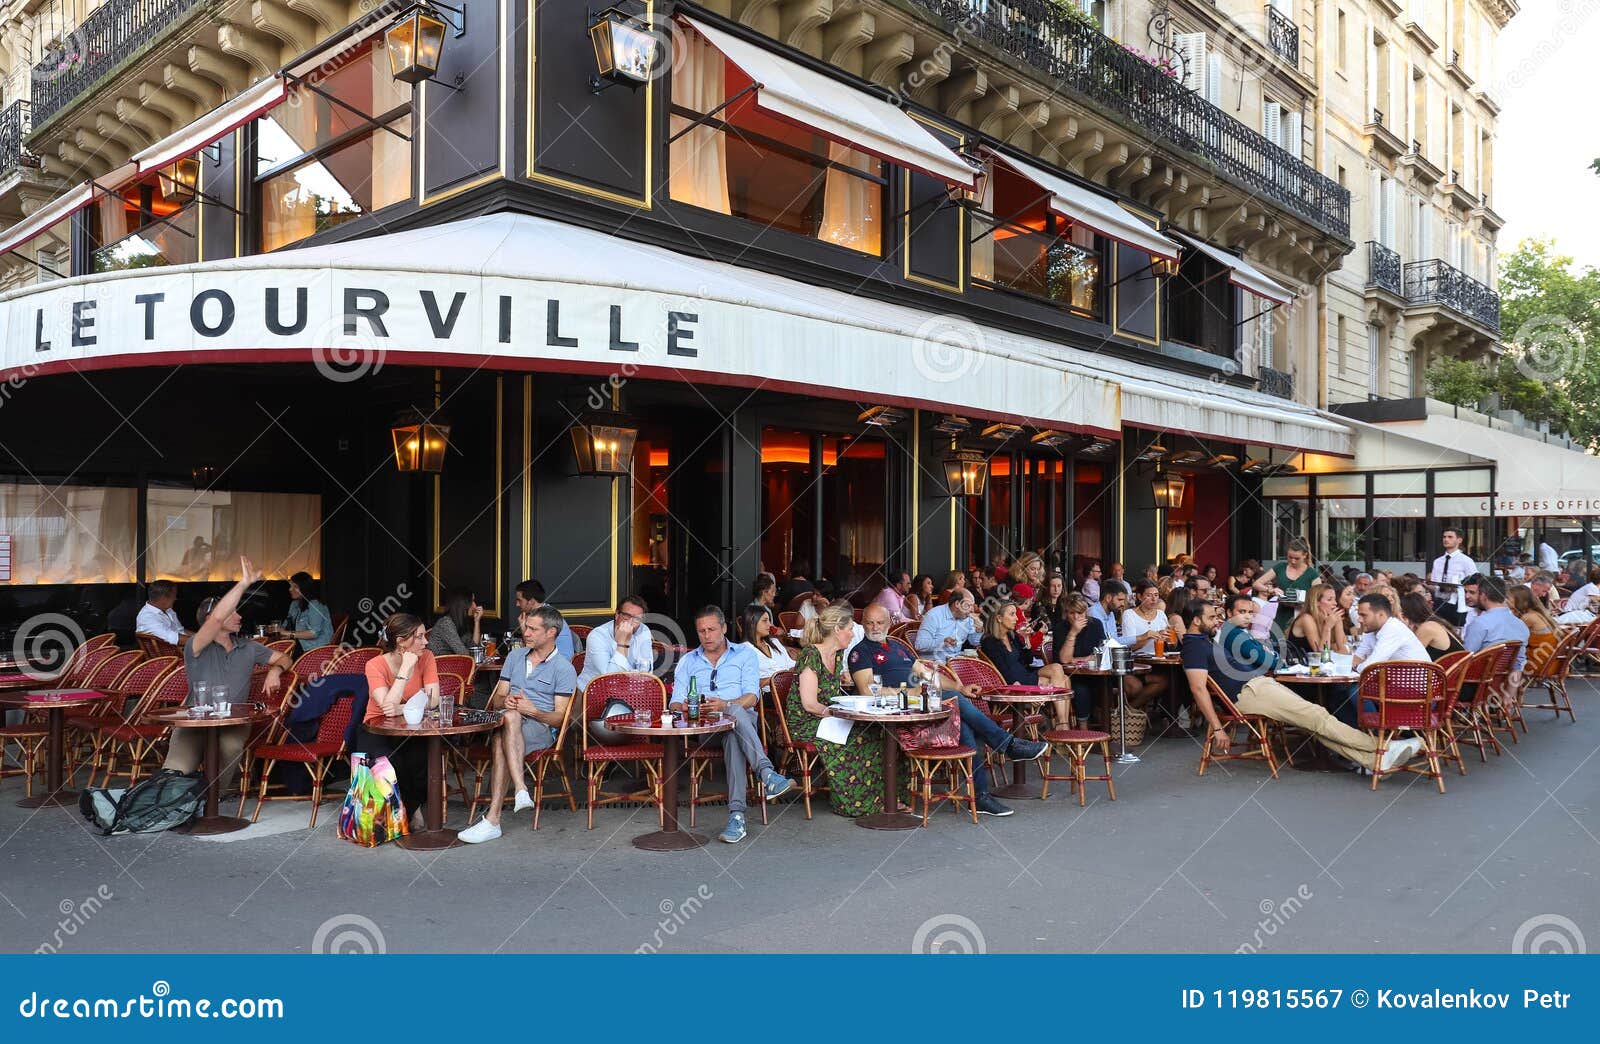 Cafe Tourville Is Traditonal French Cafe Located Near The ...